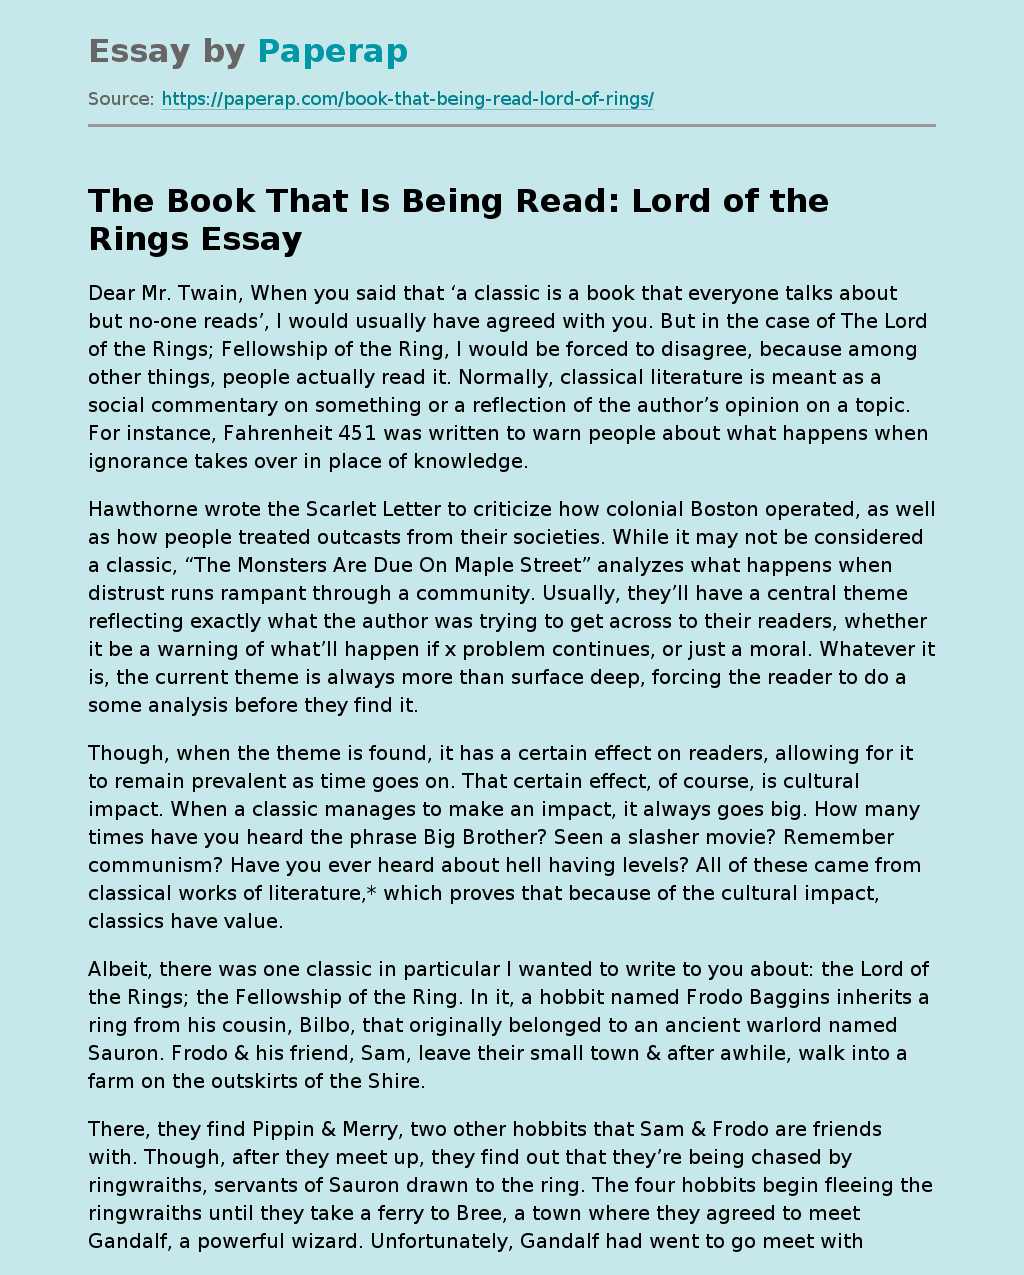 The Book That Is Being Read: Lord of the Rings